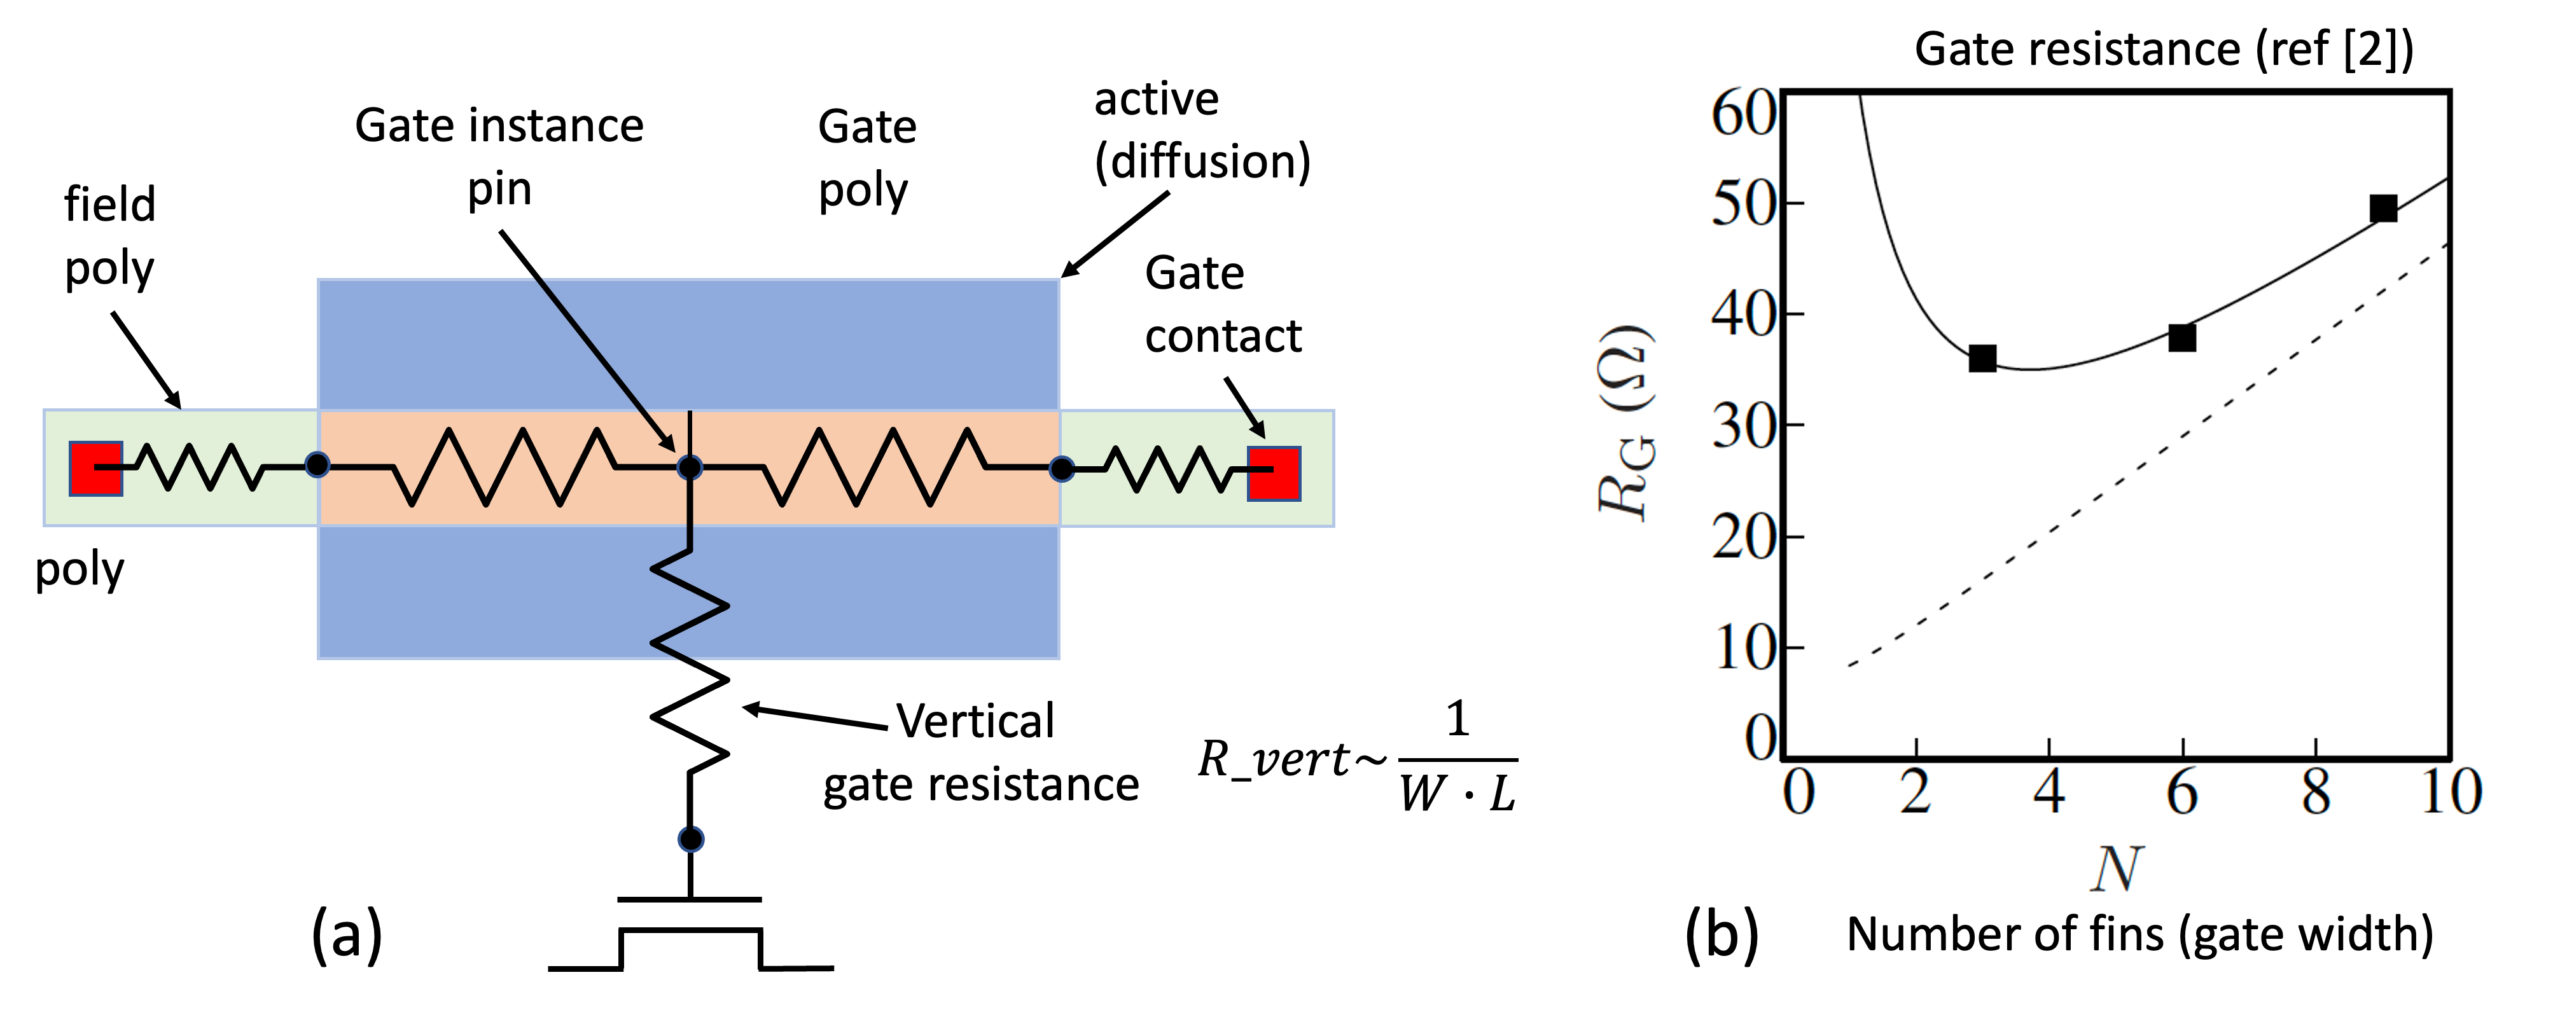 (a) Gate model accounting for vertical gate resistance, and (b) measured and simulated gate resistance versus number of fins (ref. [2]).